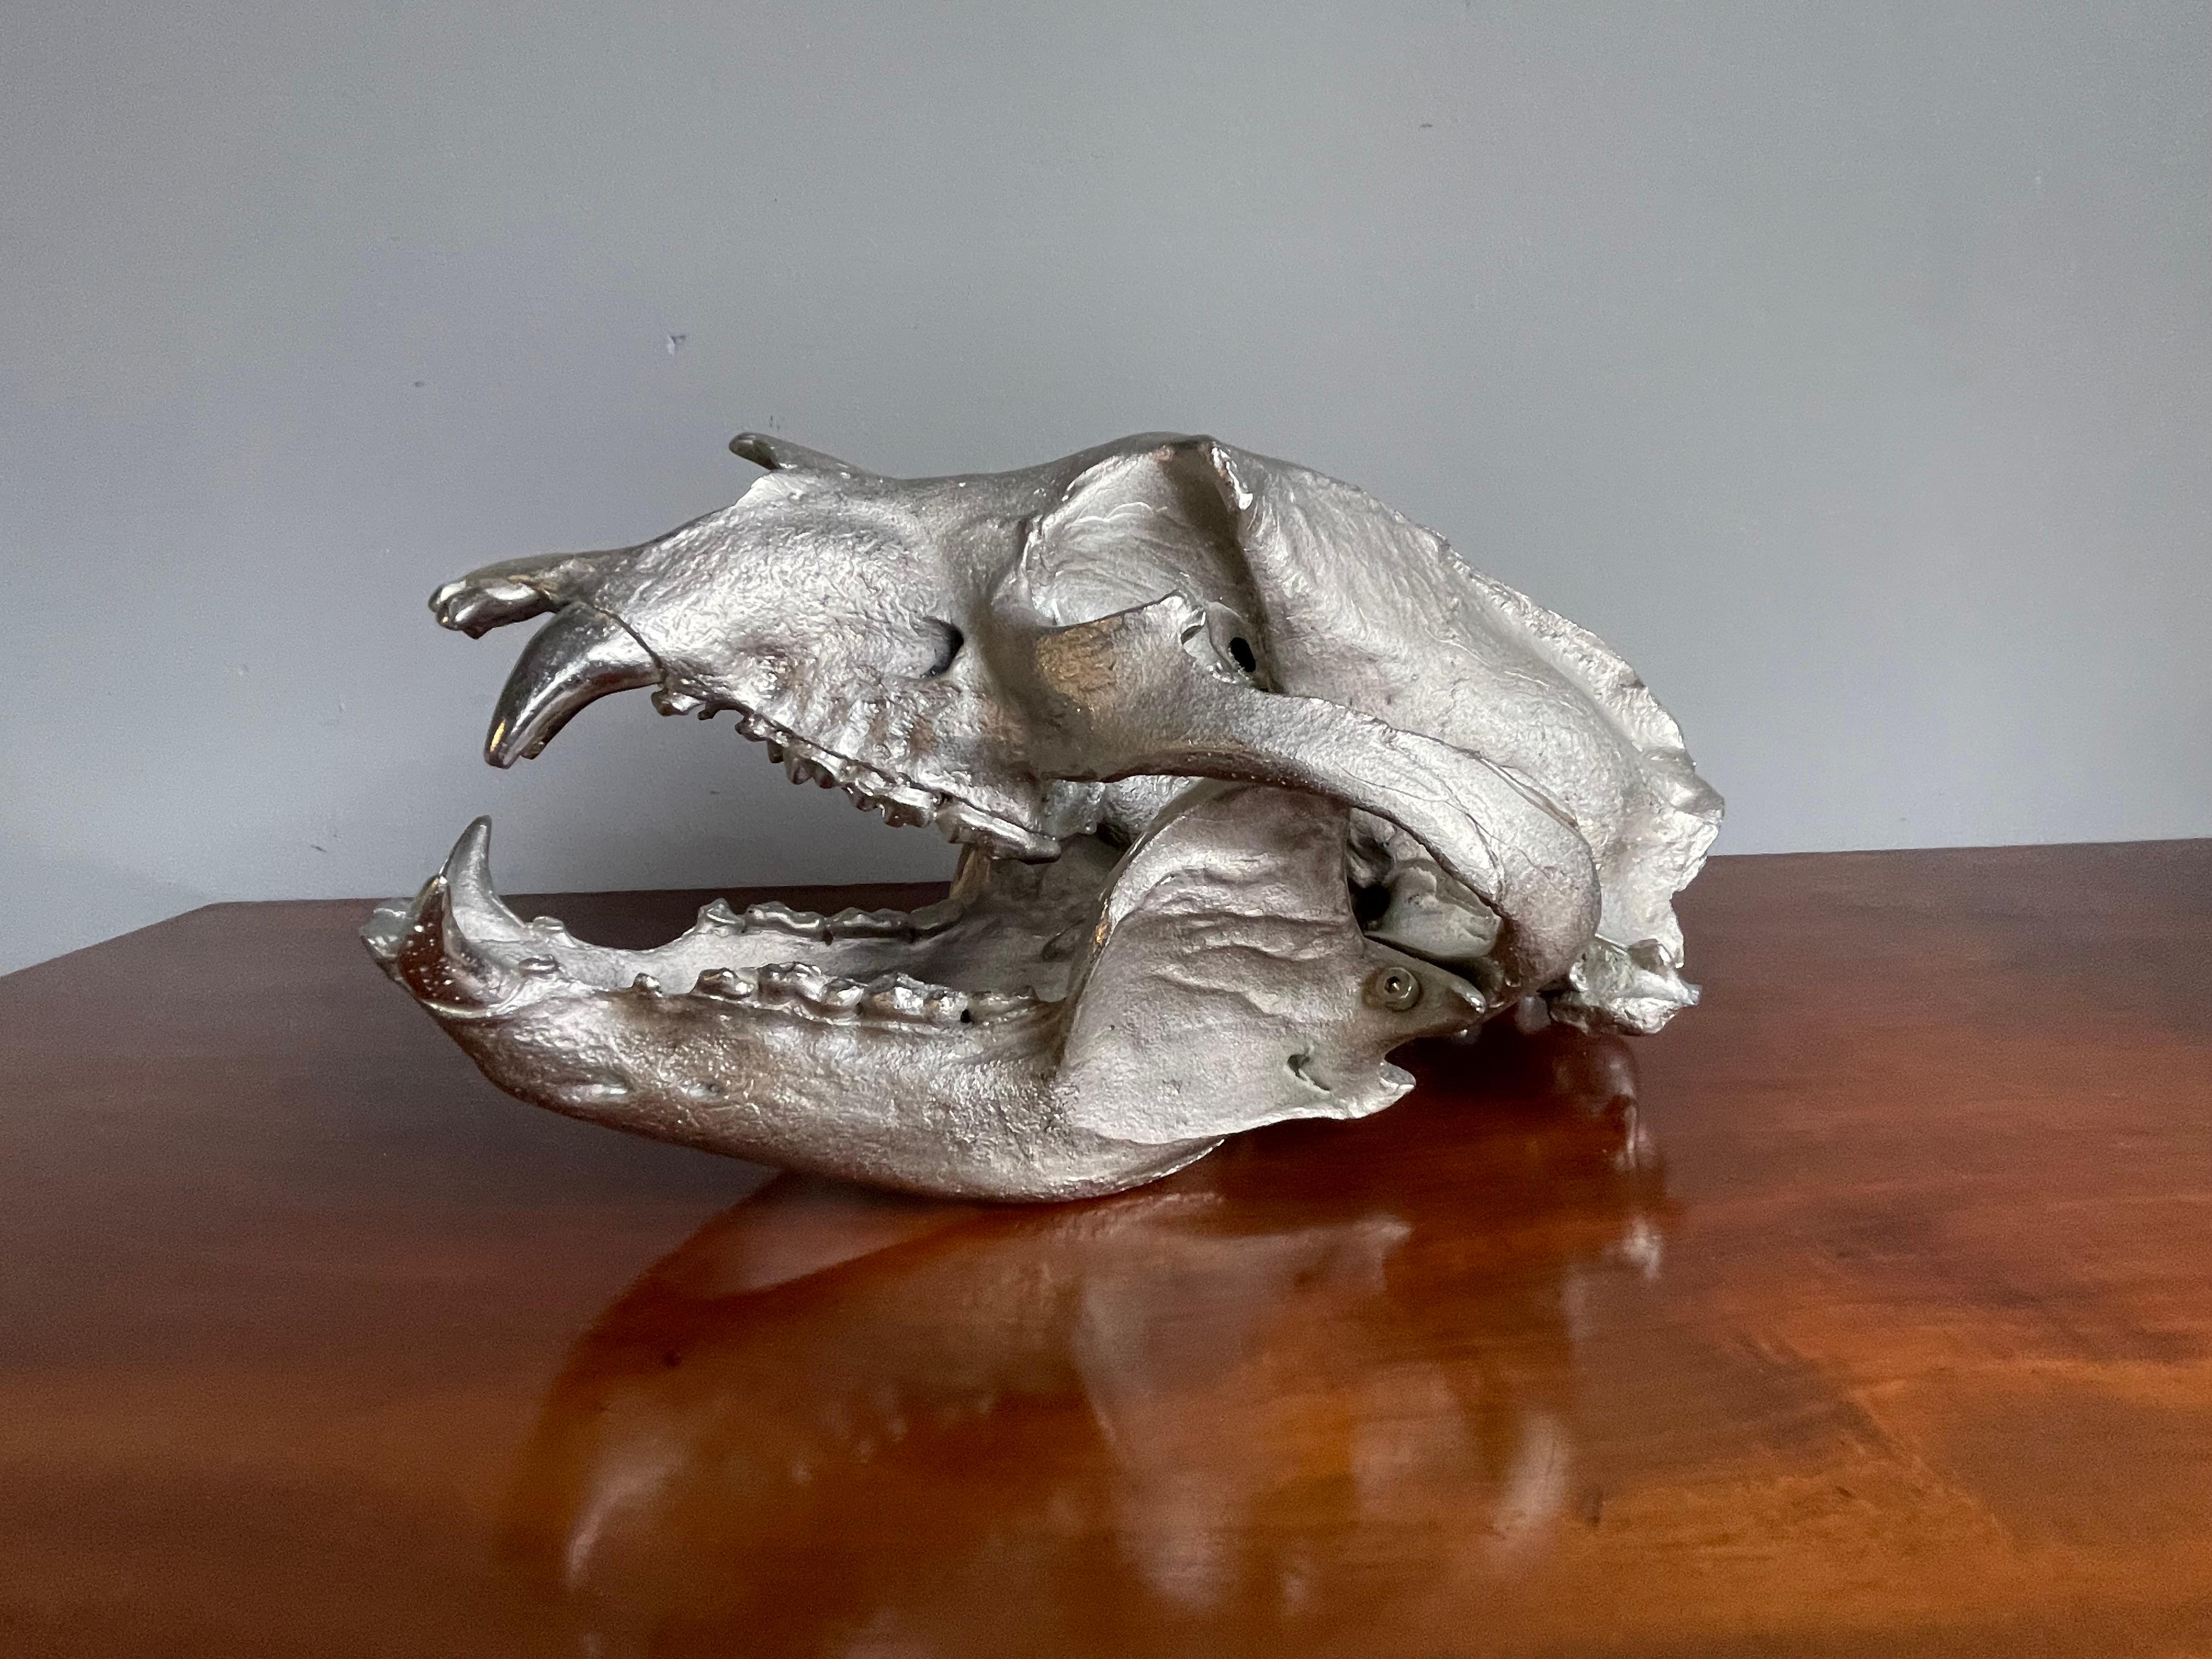 Exact replica of a black bear skull, cast in bronze.

This cool and hand-crafted bronze skull is an exact replica of a black bear skull. Less than 20 were made and about five years ago they came into our possession when we bought the entire